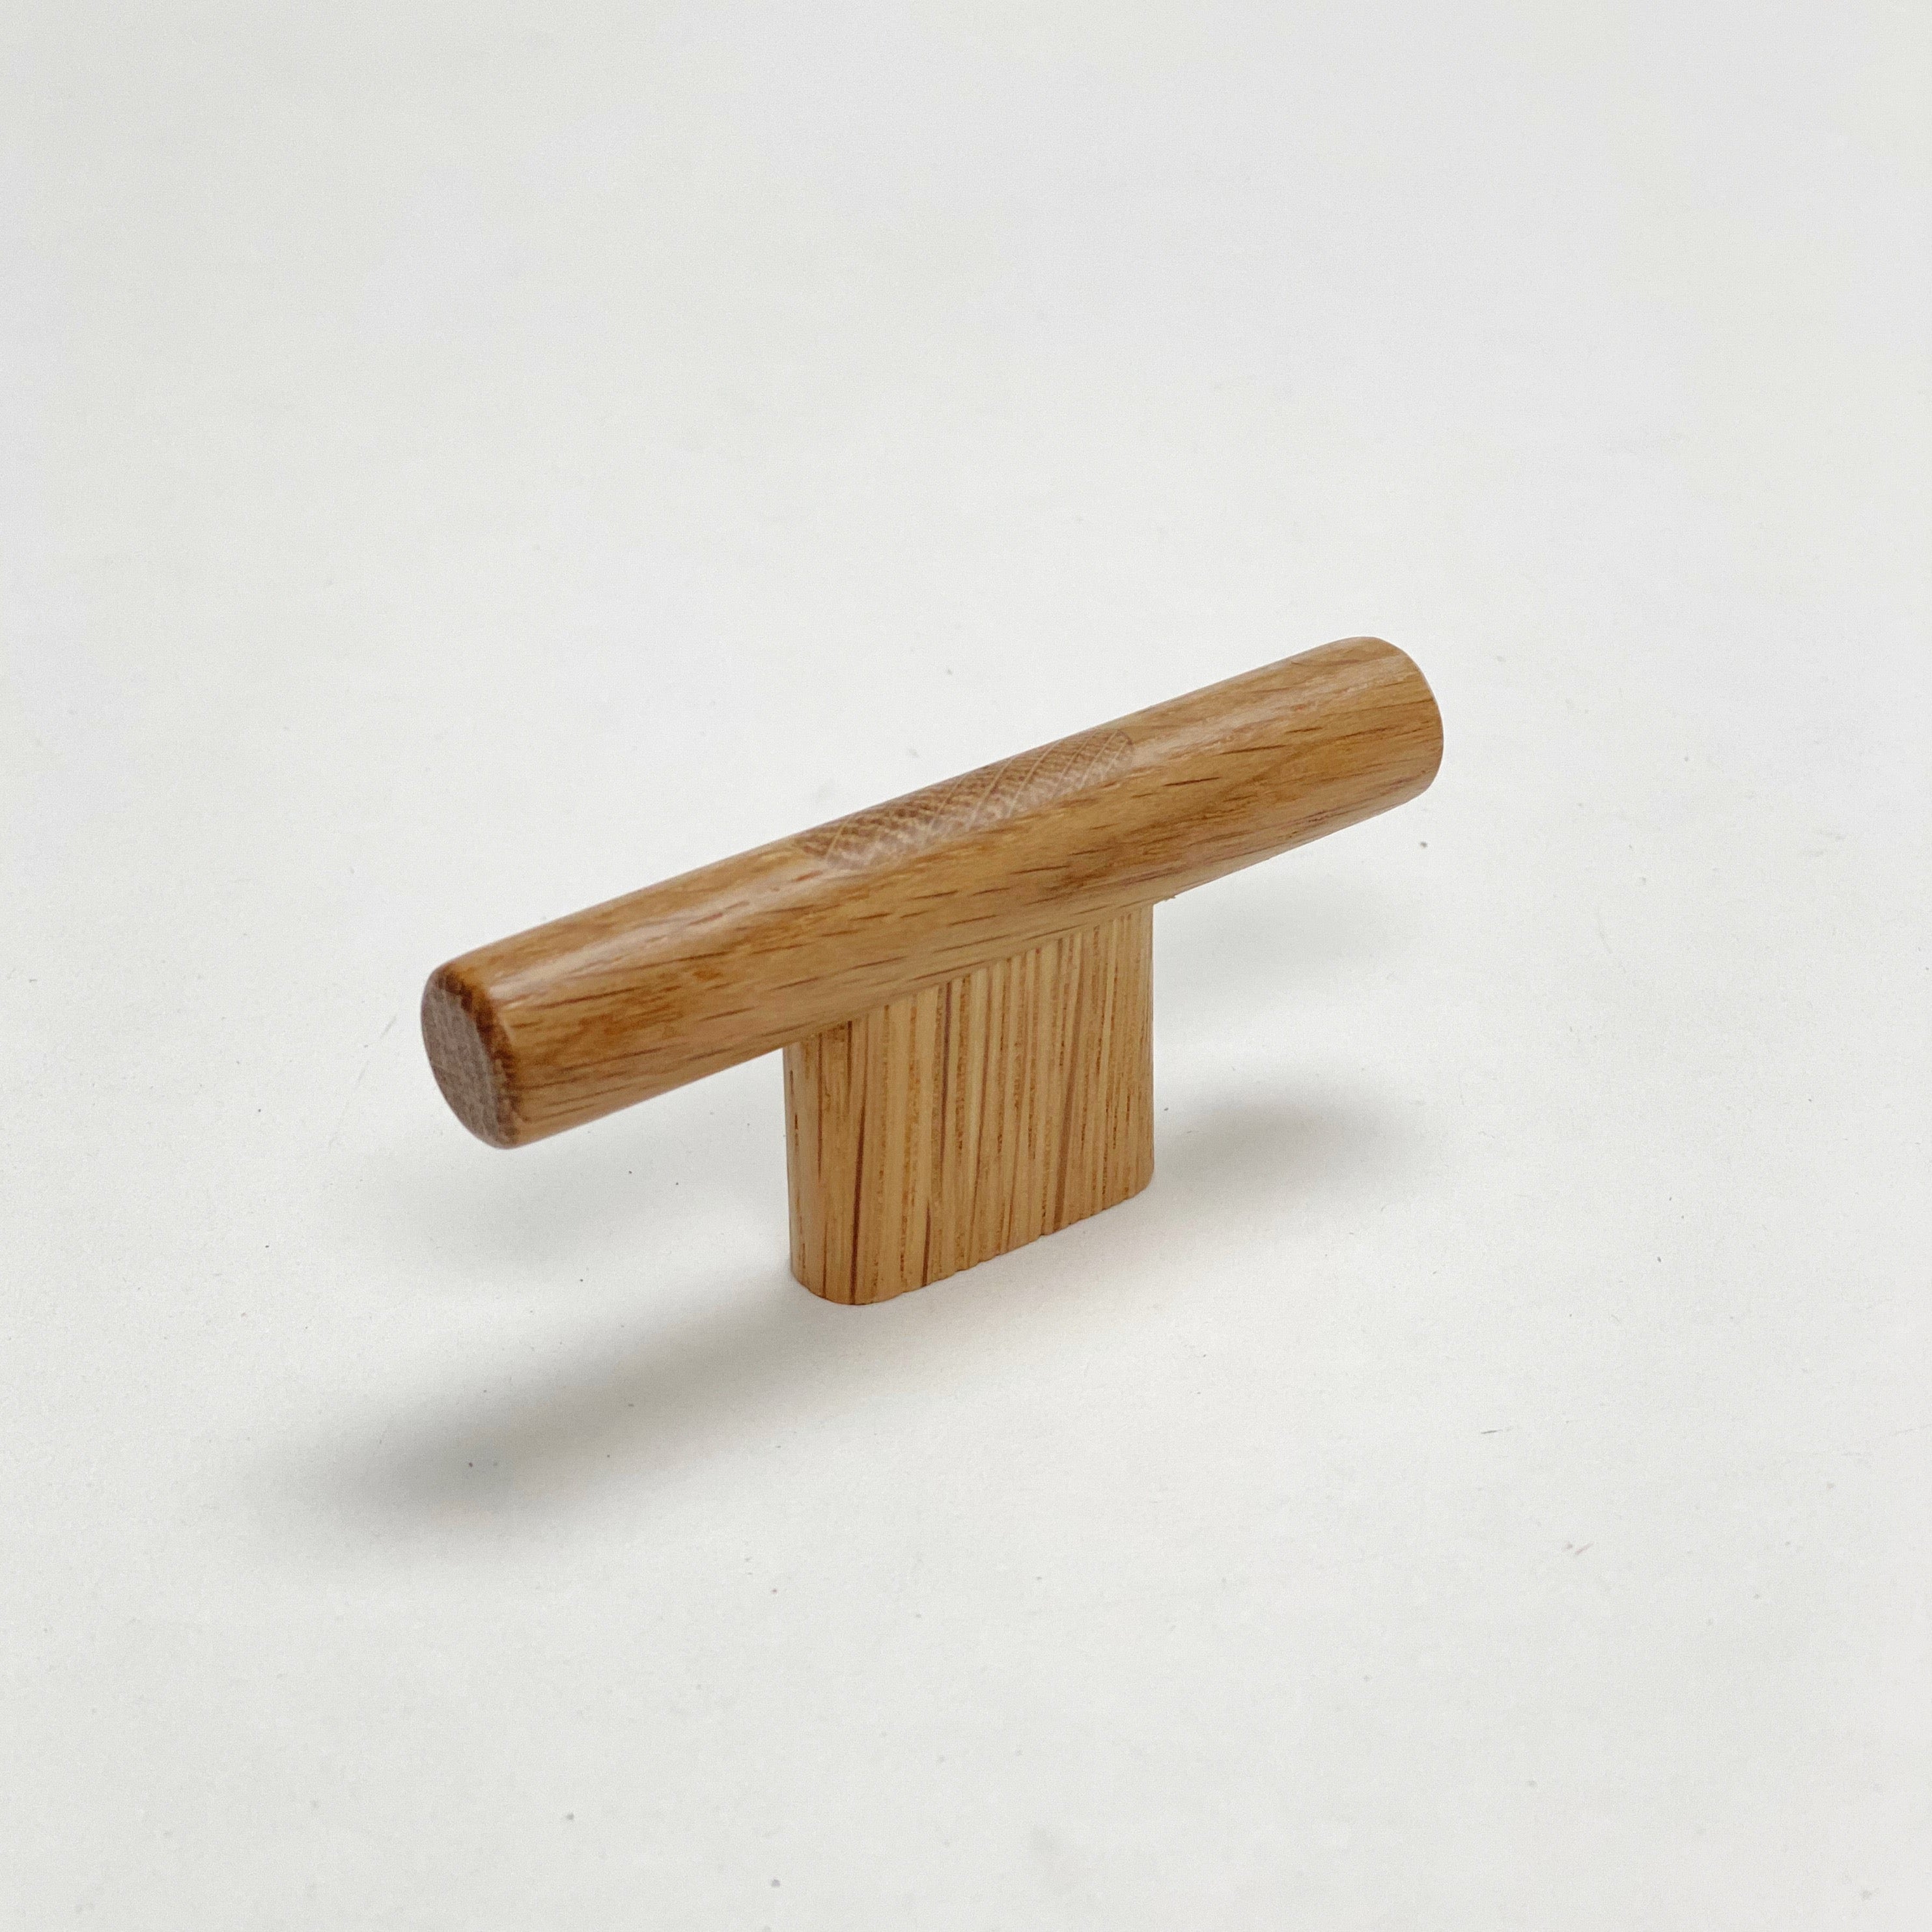 Lacquered Oak "Join" Wood Cabinet Knobs and Drawer Handles - Forge Hardware Studio